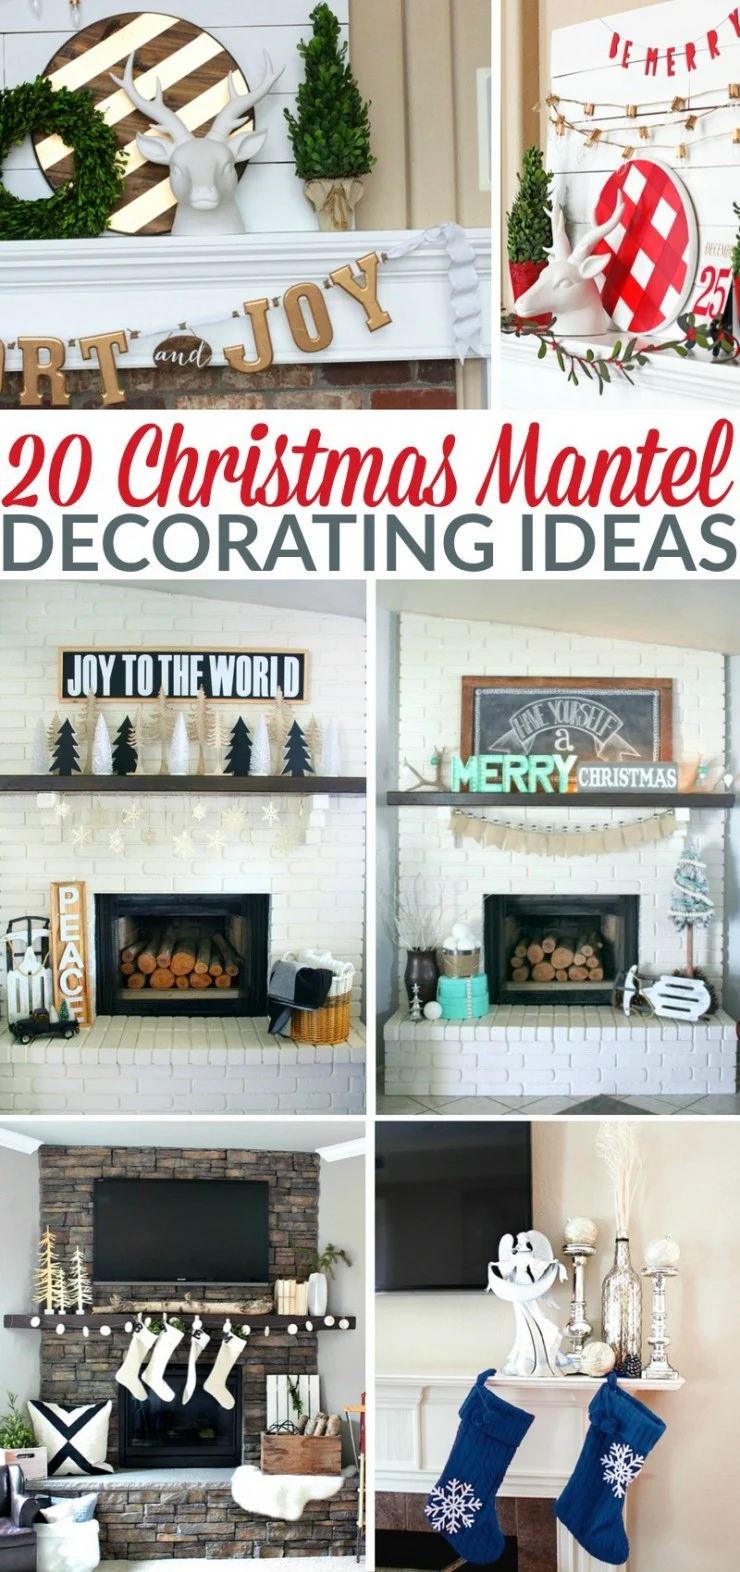 One of the best ways to turn your home into a magical place of joy is with a beautiful Christmas mantel that will set the holiday tone for your entire home. 